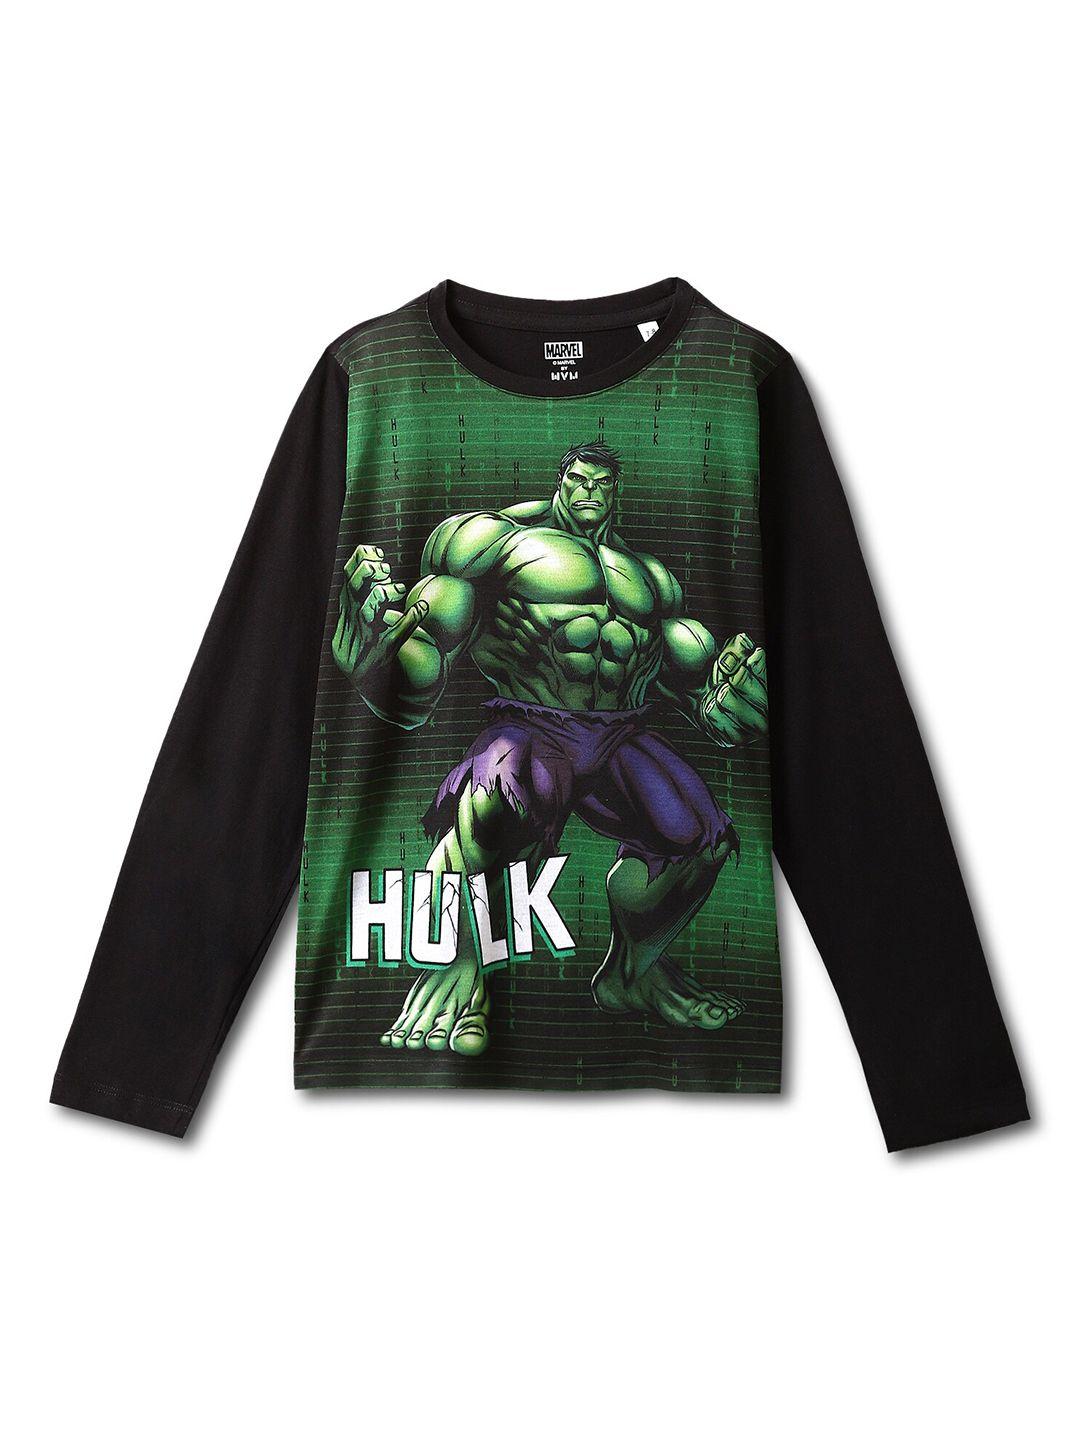 wear-your-mind-boys-humour-and-comic-hulk-printed-t-shirt